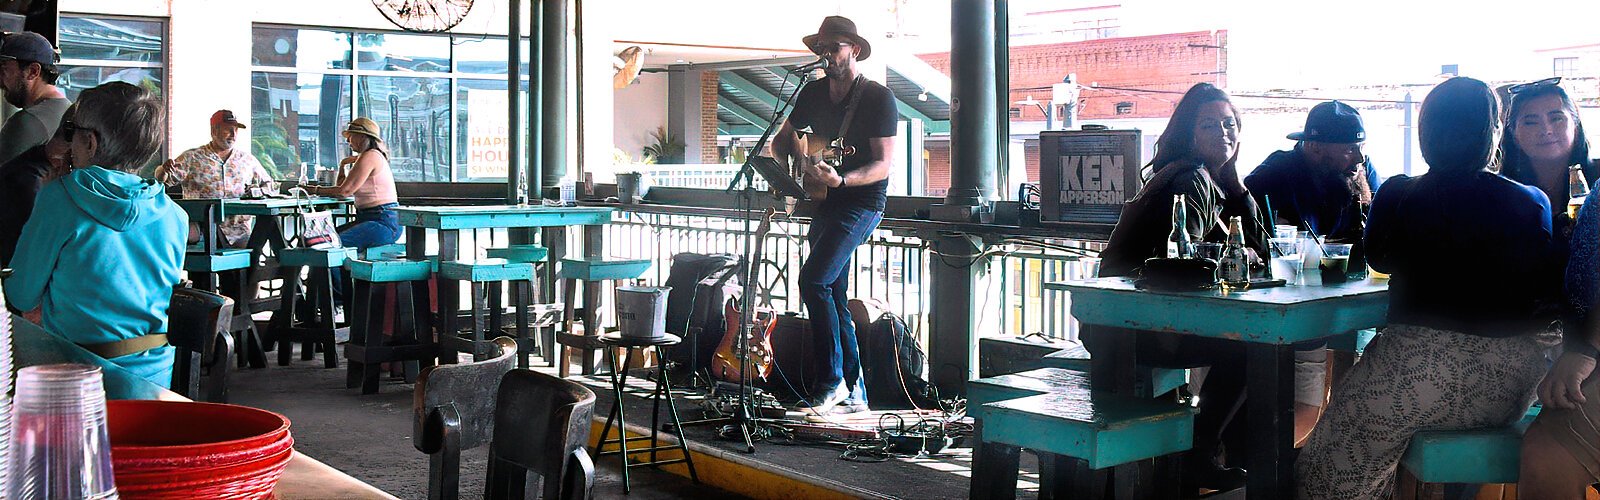  His music spilling into the street, guitarist singer Ken Apperson entertains the patrons of Centro Cantina, an outside open air bar overlooking Seventh Avenue at Centro Ybor plaza. 